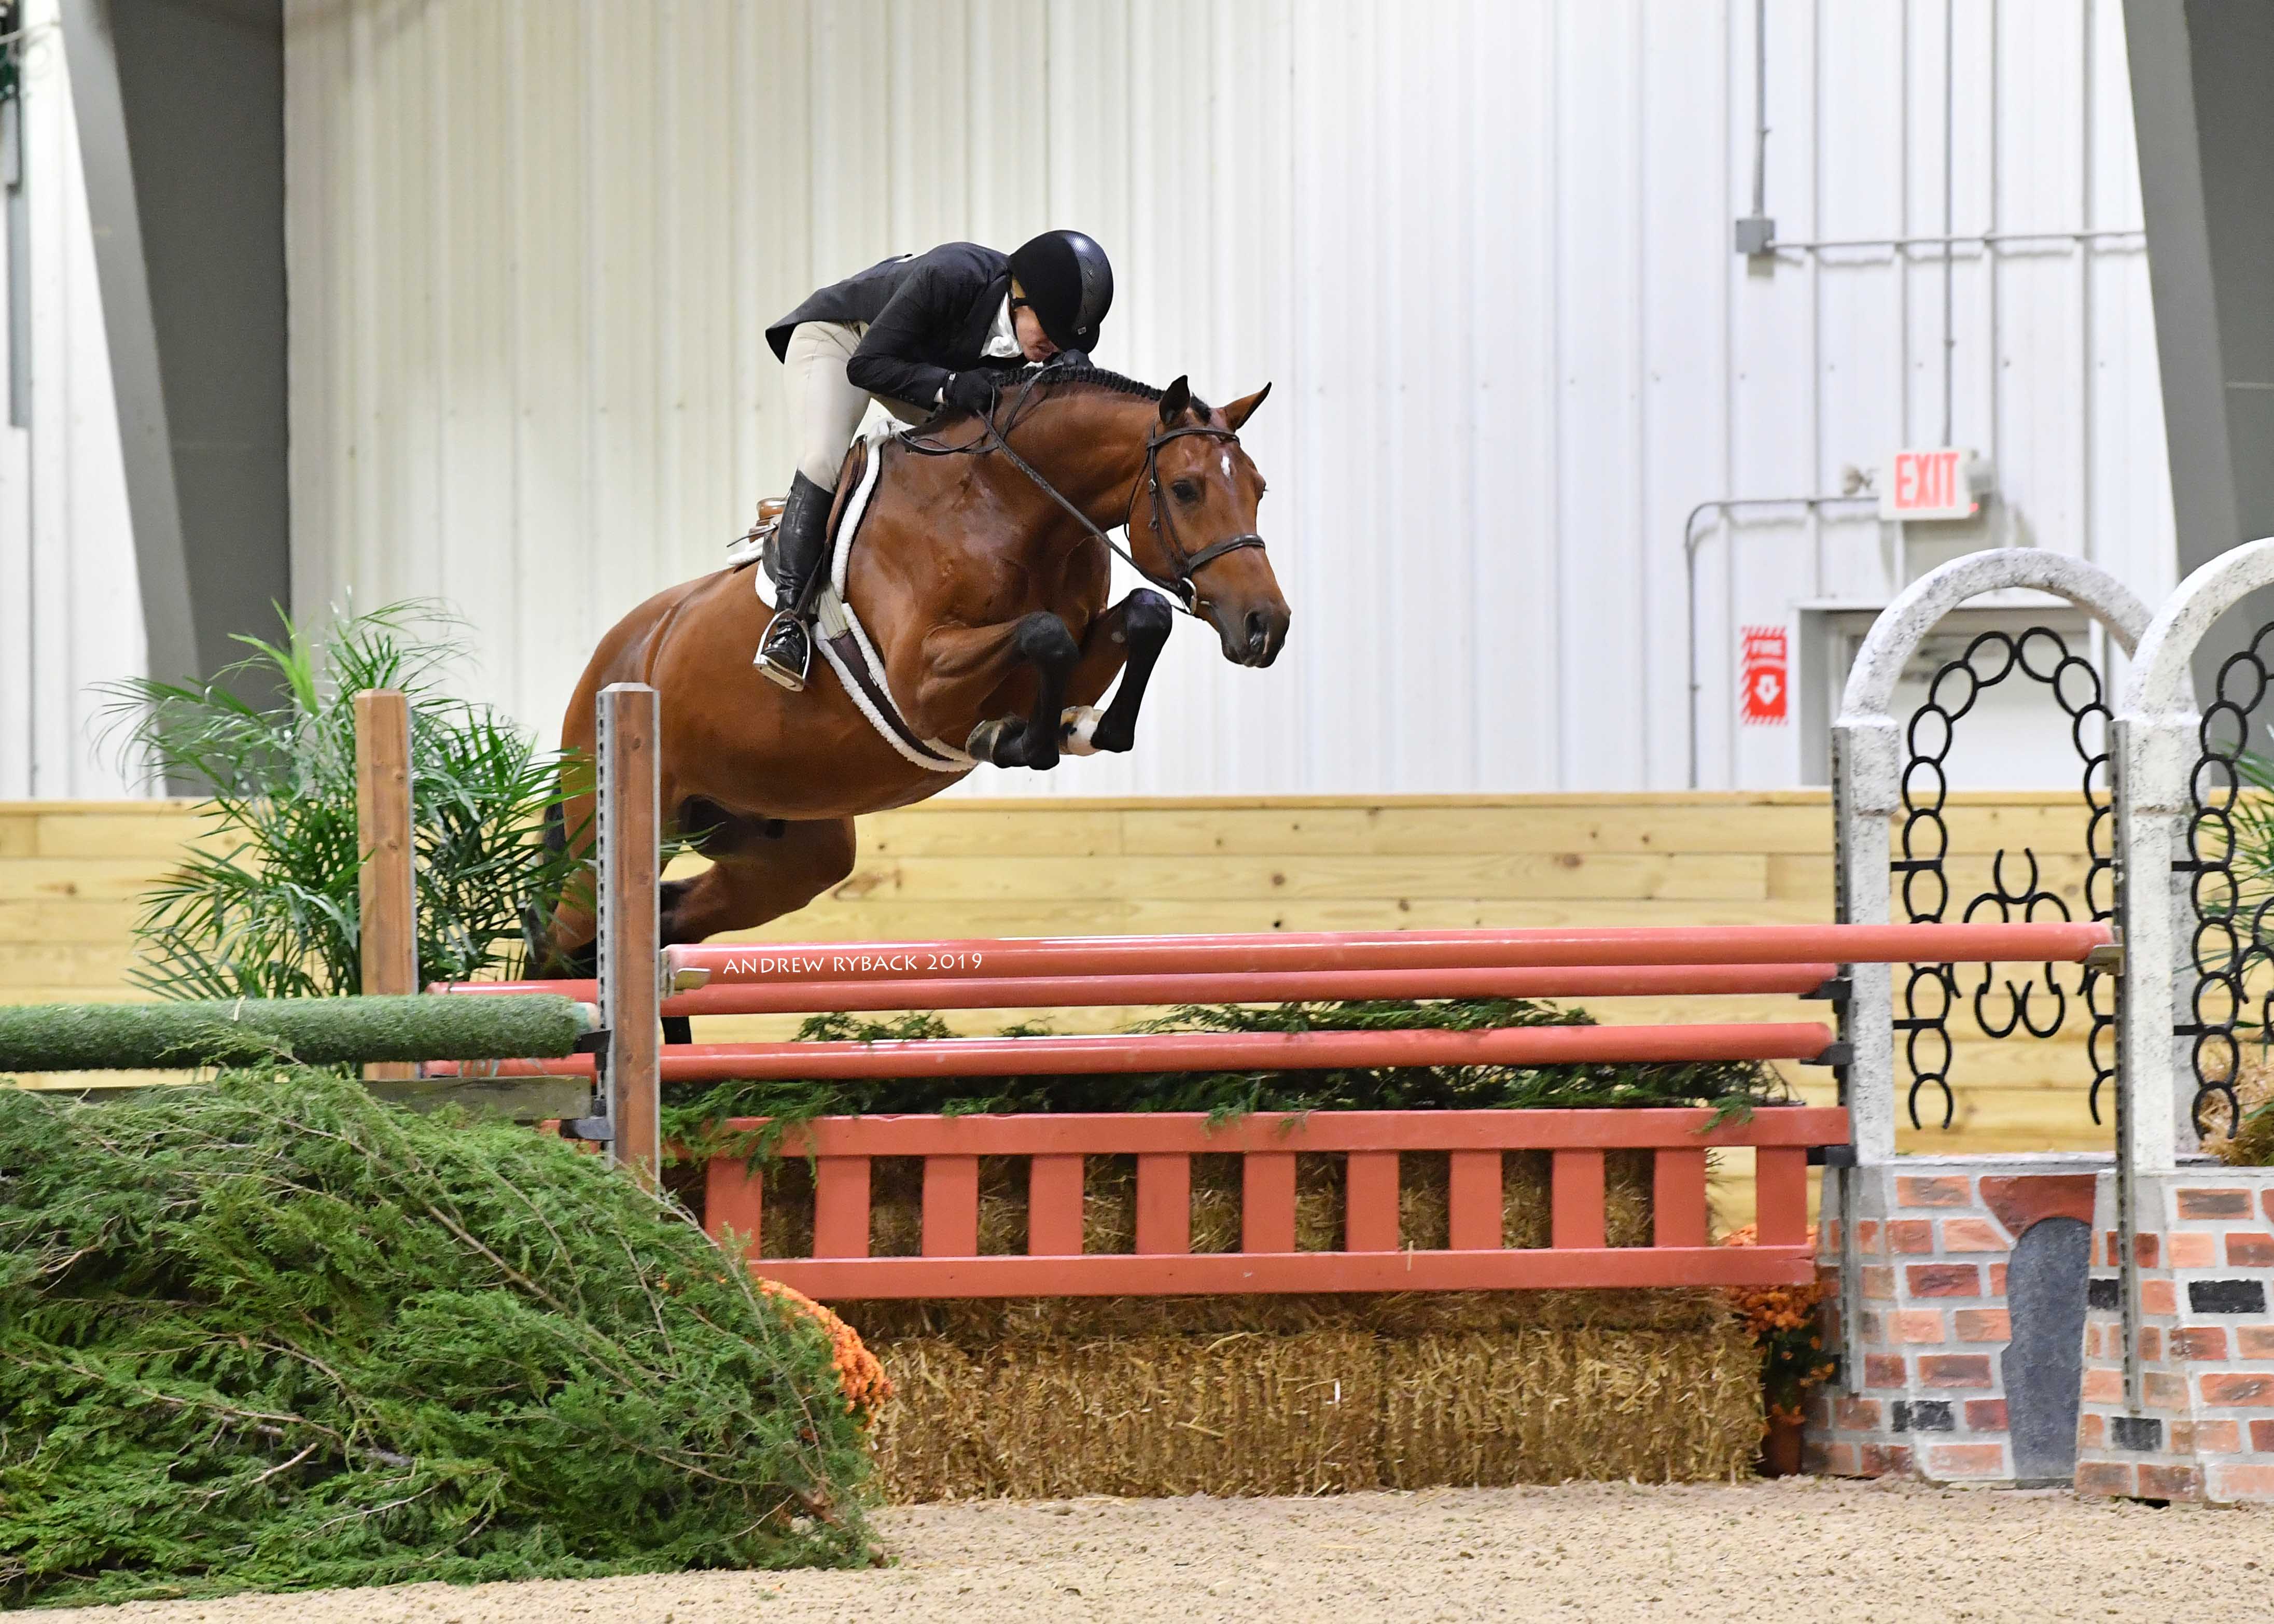 Greg Crolick and Corallo Top Take $40,000 Equestrian USHJA Derby Center International - the Z Honors World in Hunter